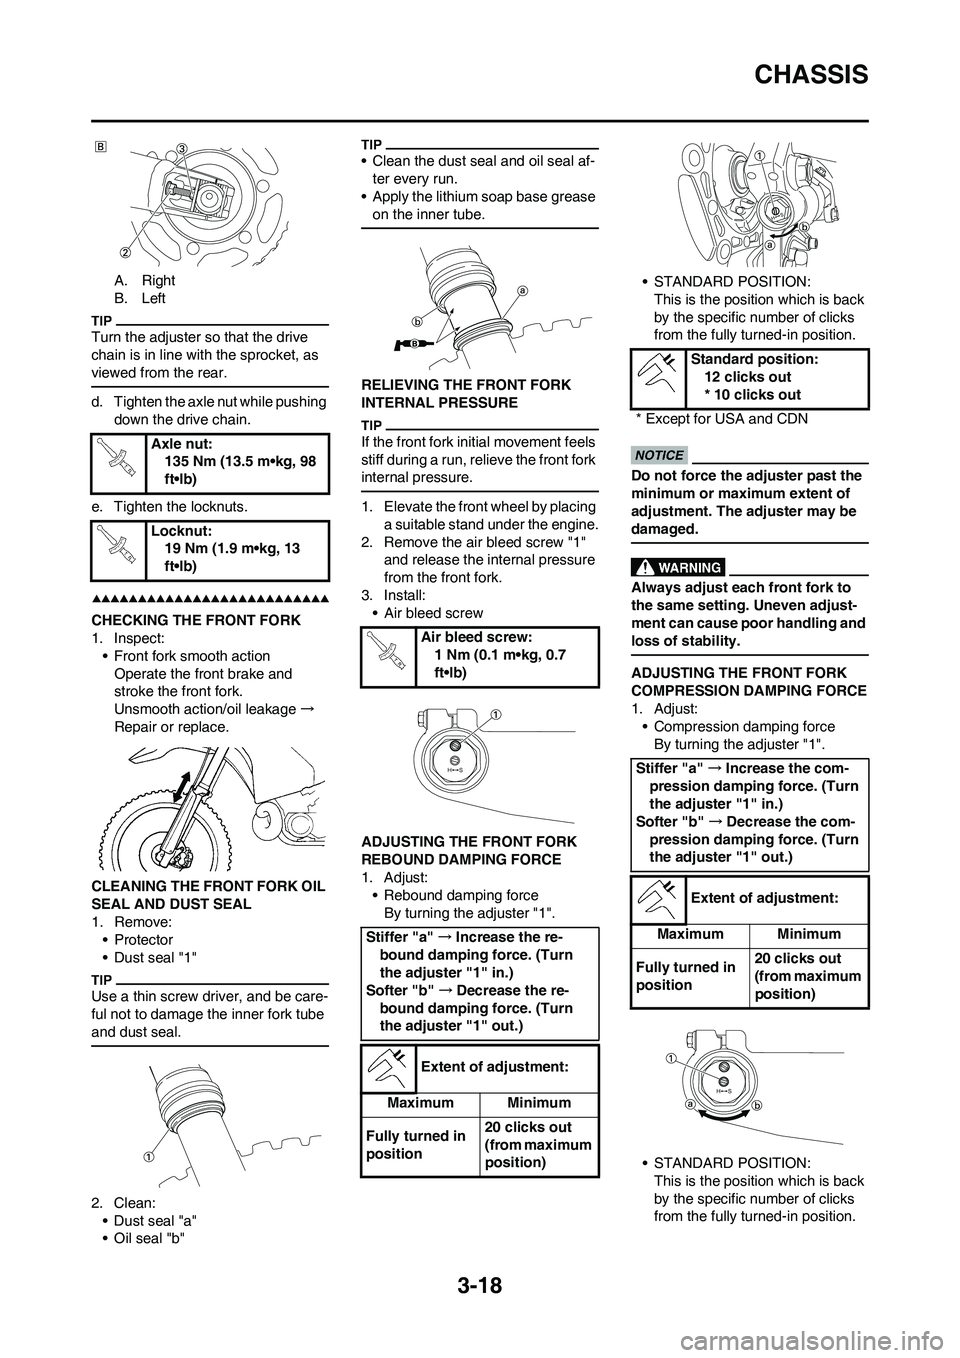 YAMAHA YZ450F 2009  Owners Manual 3-18
CHASSIS
A. Right
B. Left
Turn the adjuster so that the drive 
chain is in line with the sprocket, as 
viewed from the rear.
d. Tighten the axle nut while pushing 
down the drive chain.
e. Tighten